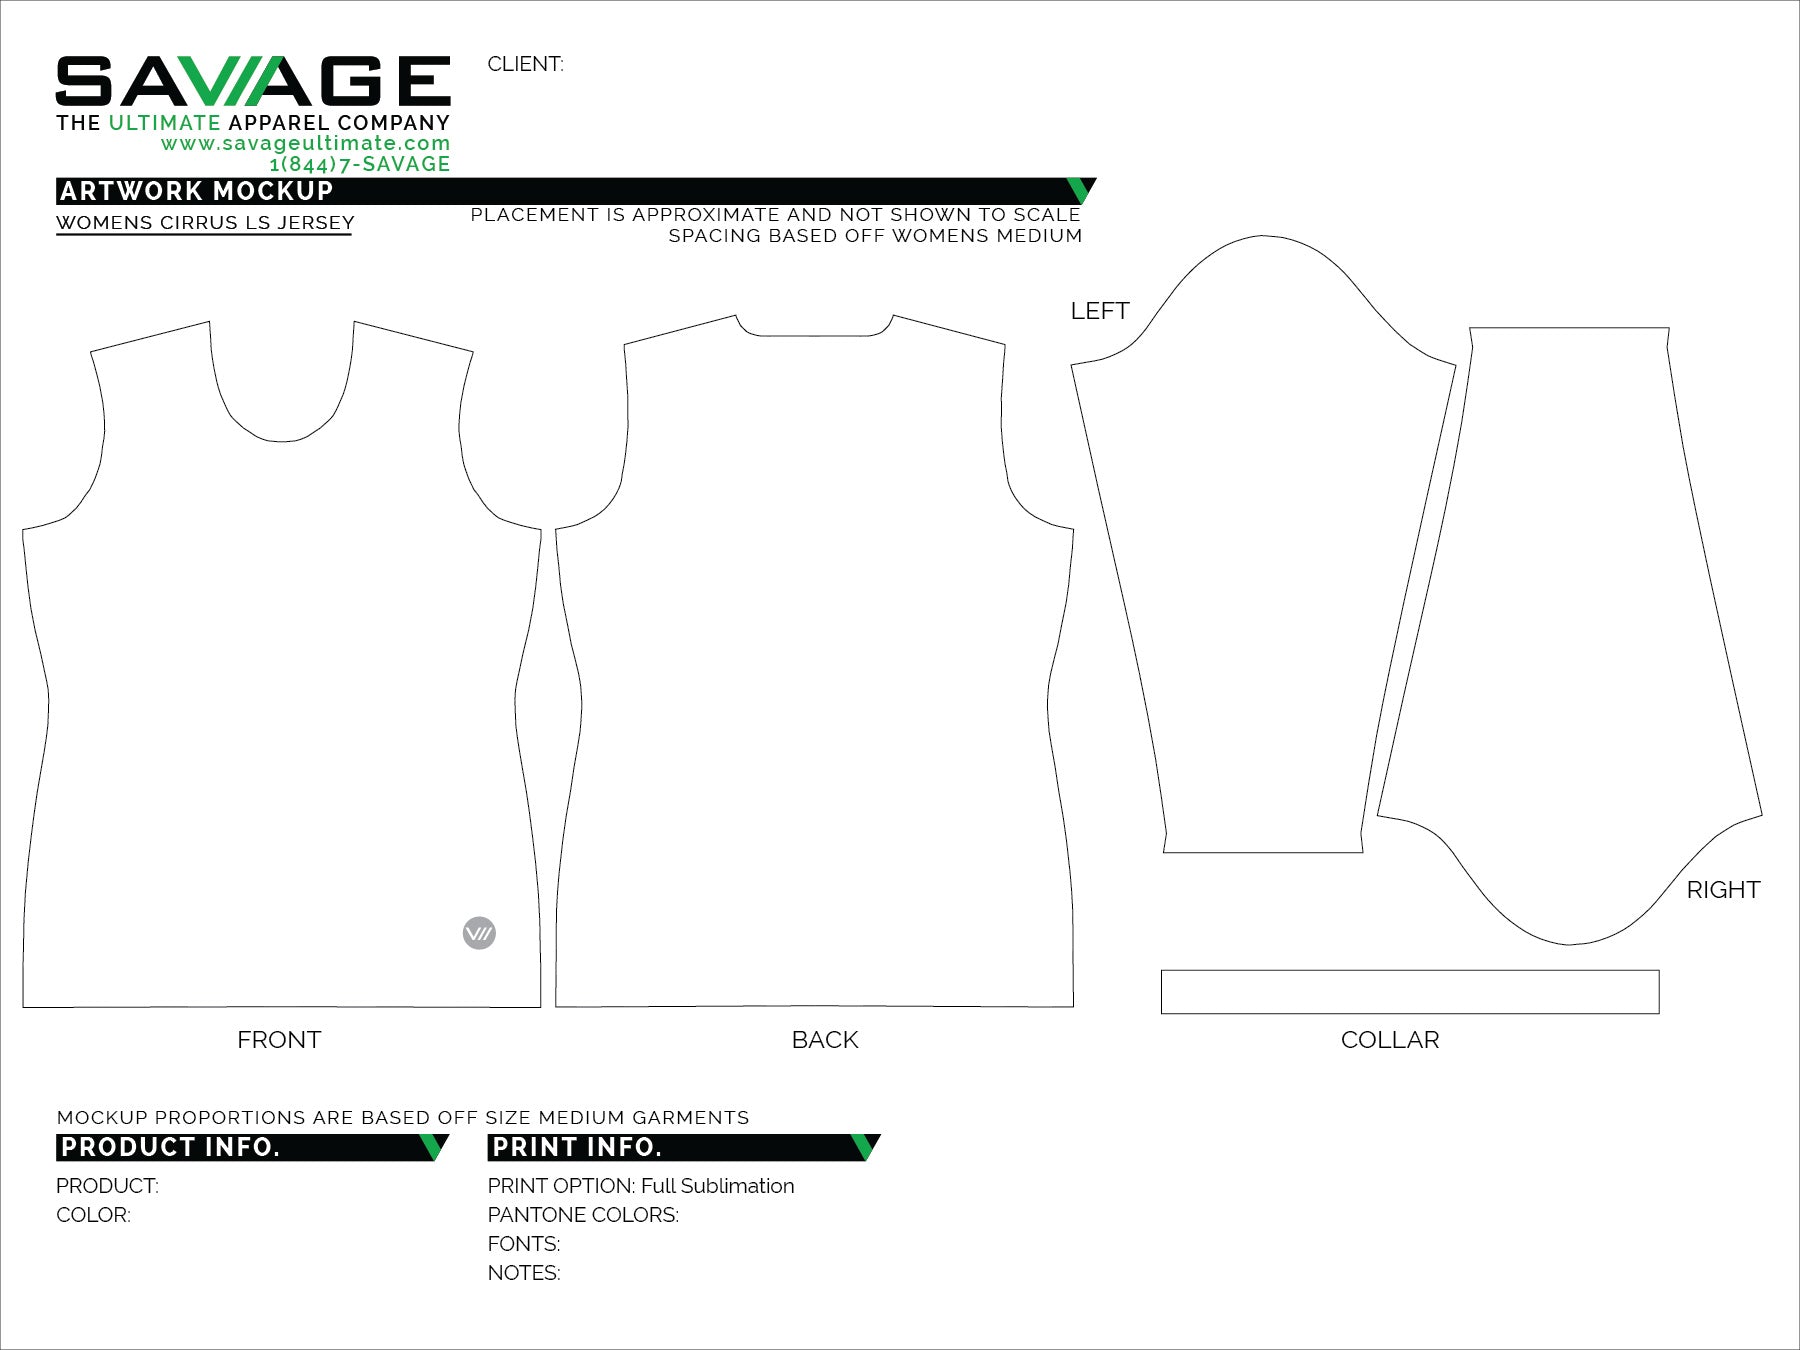 Download Buy long sleeve jersey template - 61% OFF! Share discount